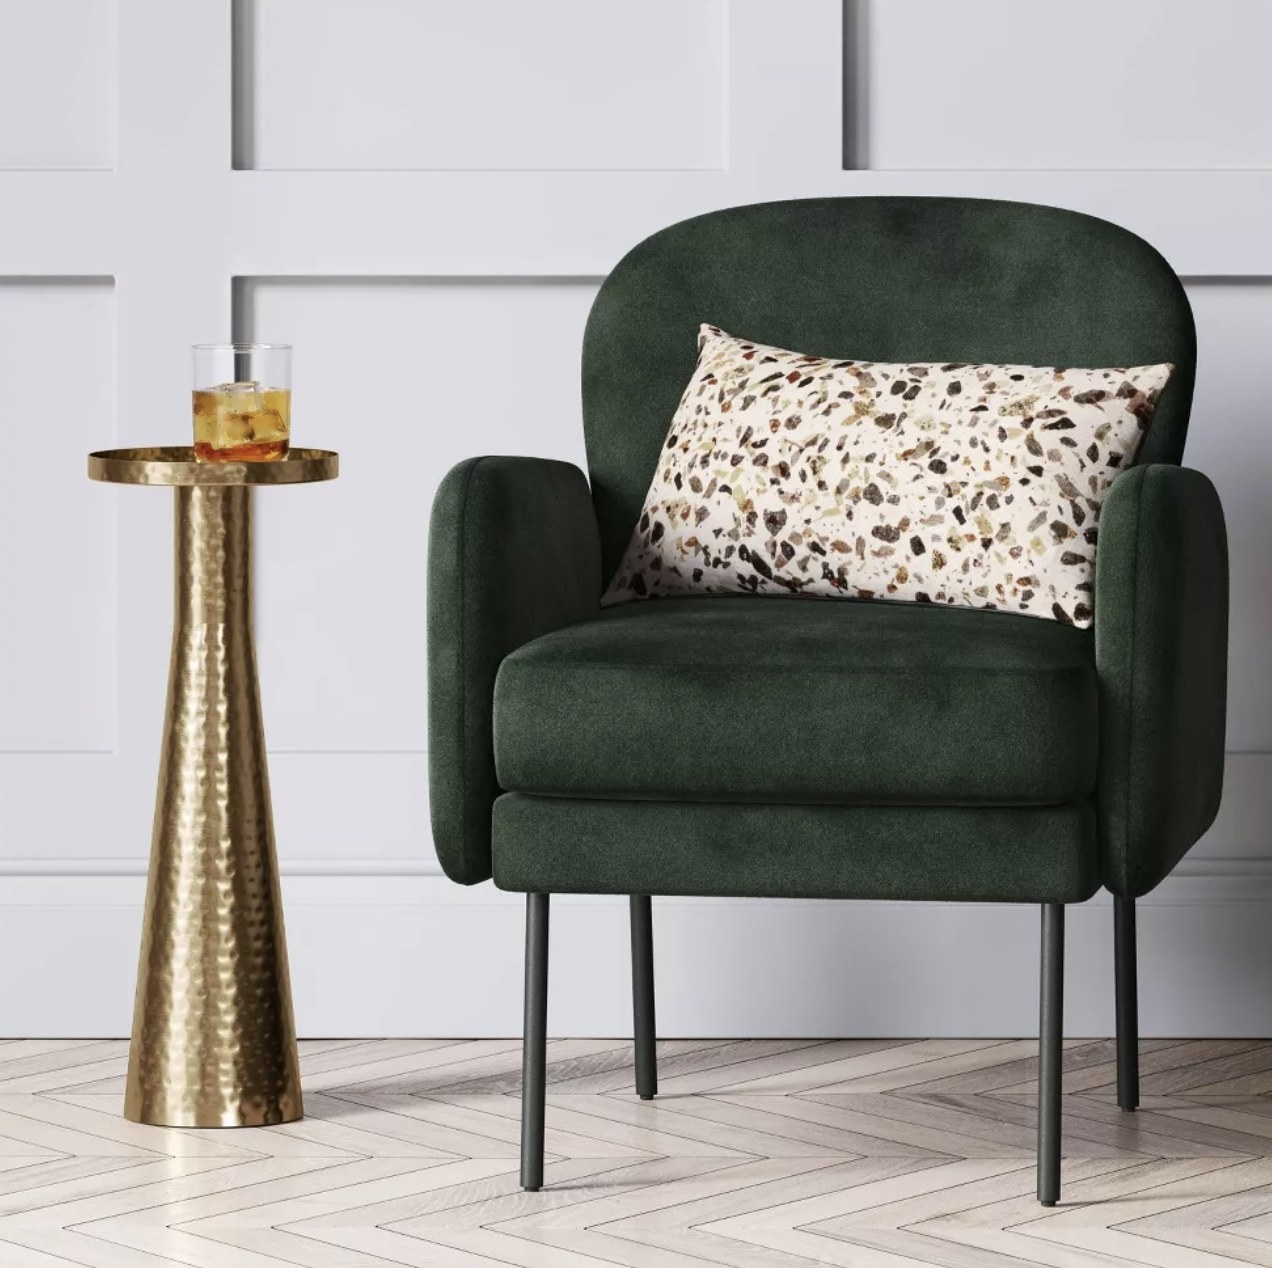 the gold side table with cocktail next to accent chair